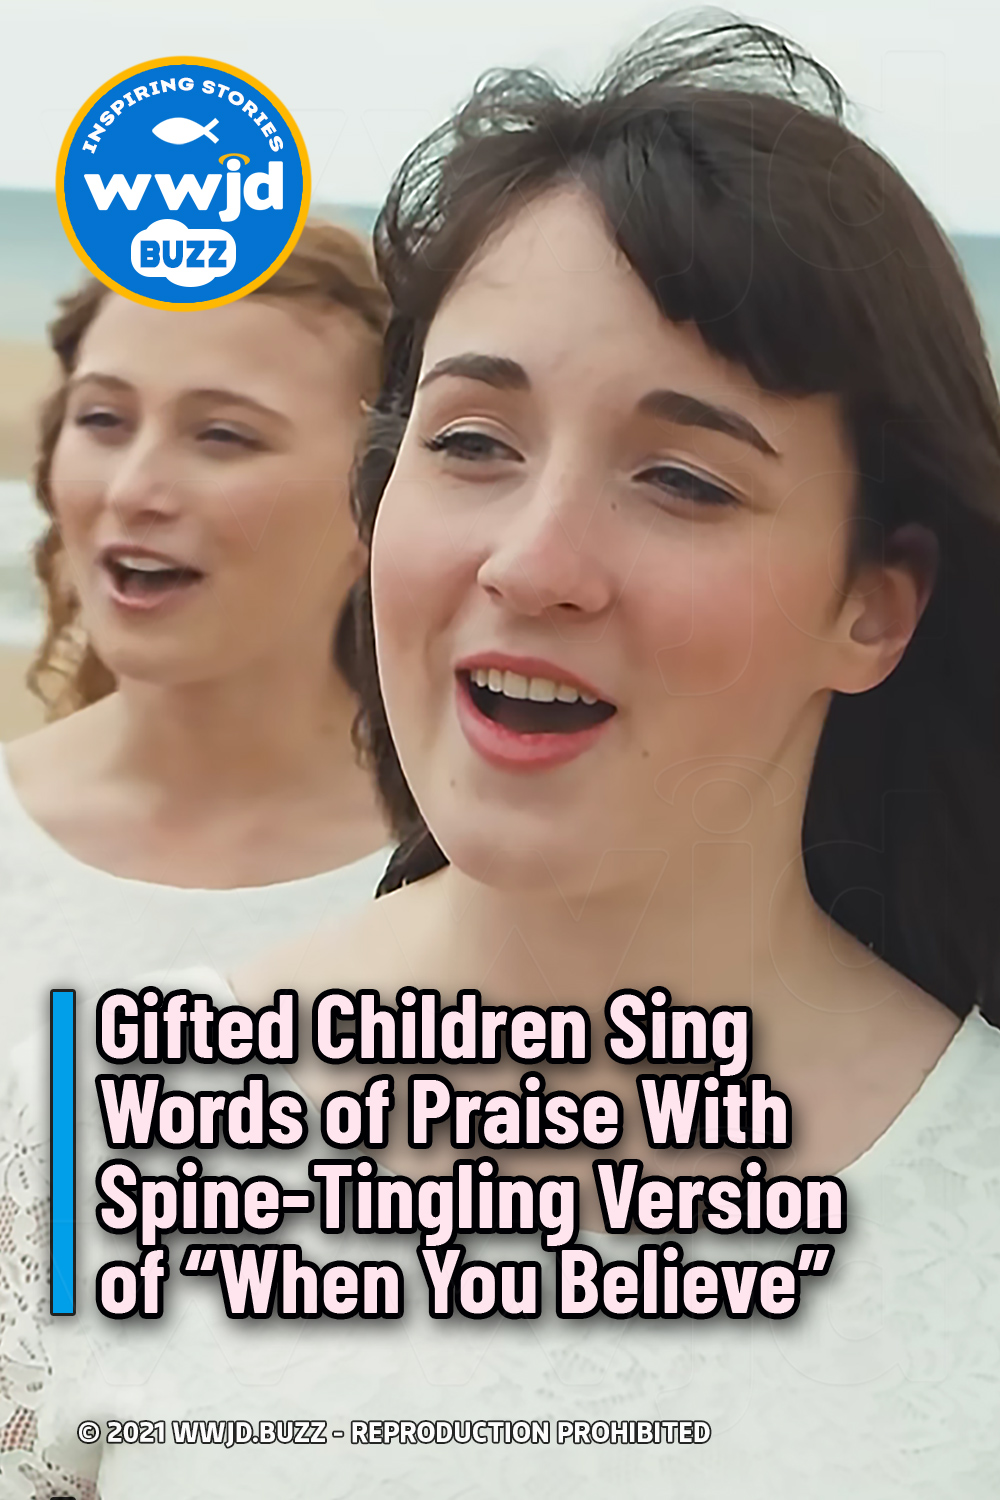 Gifted Children Sing Words of Praise With Spine-Tingling Version of “When You Believe”